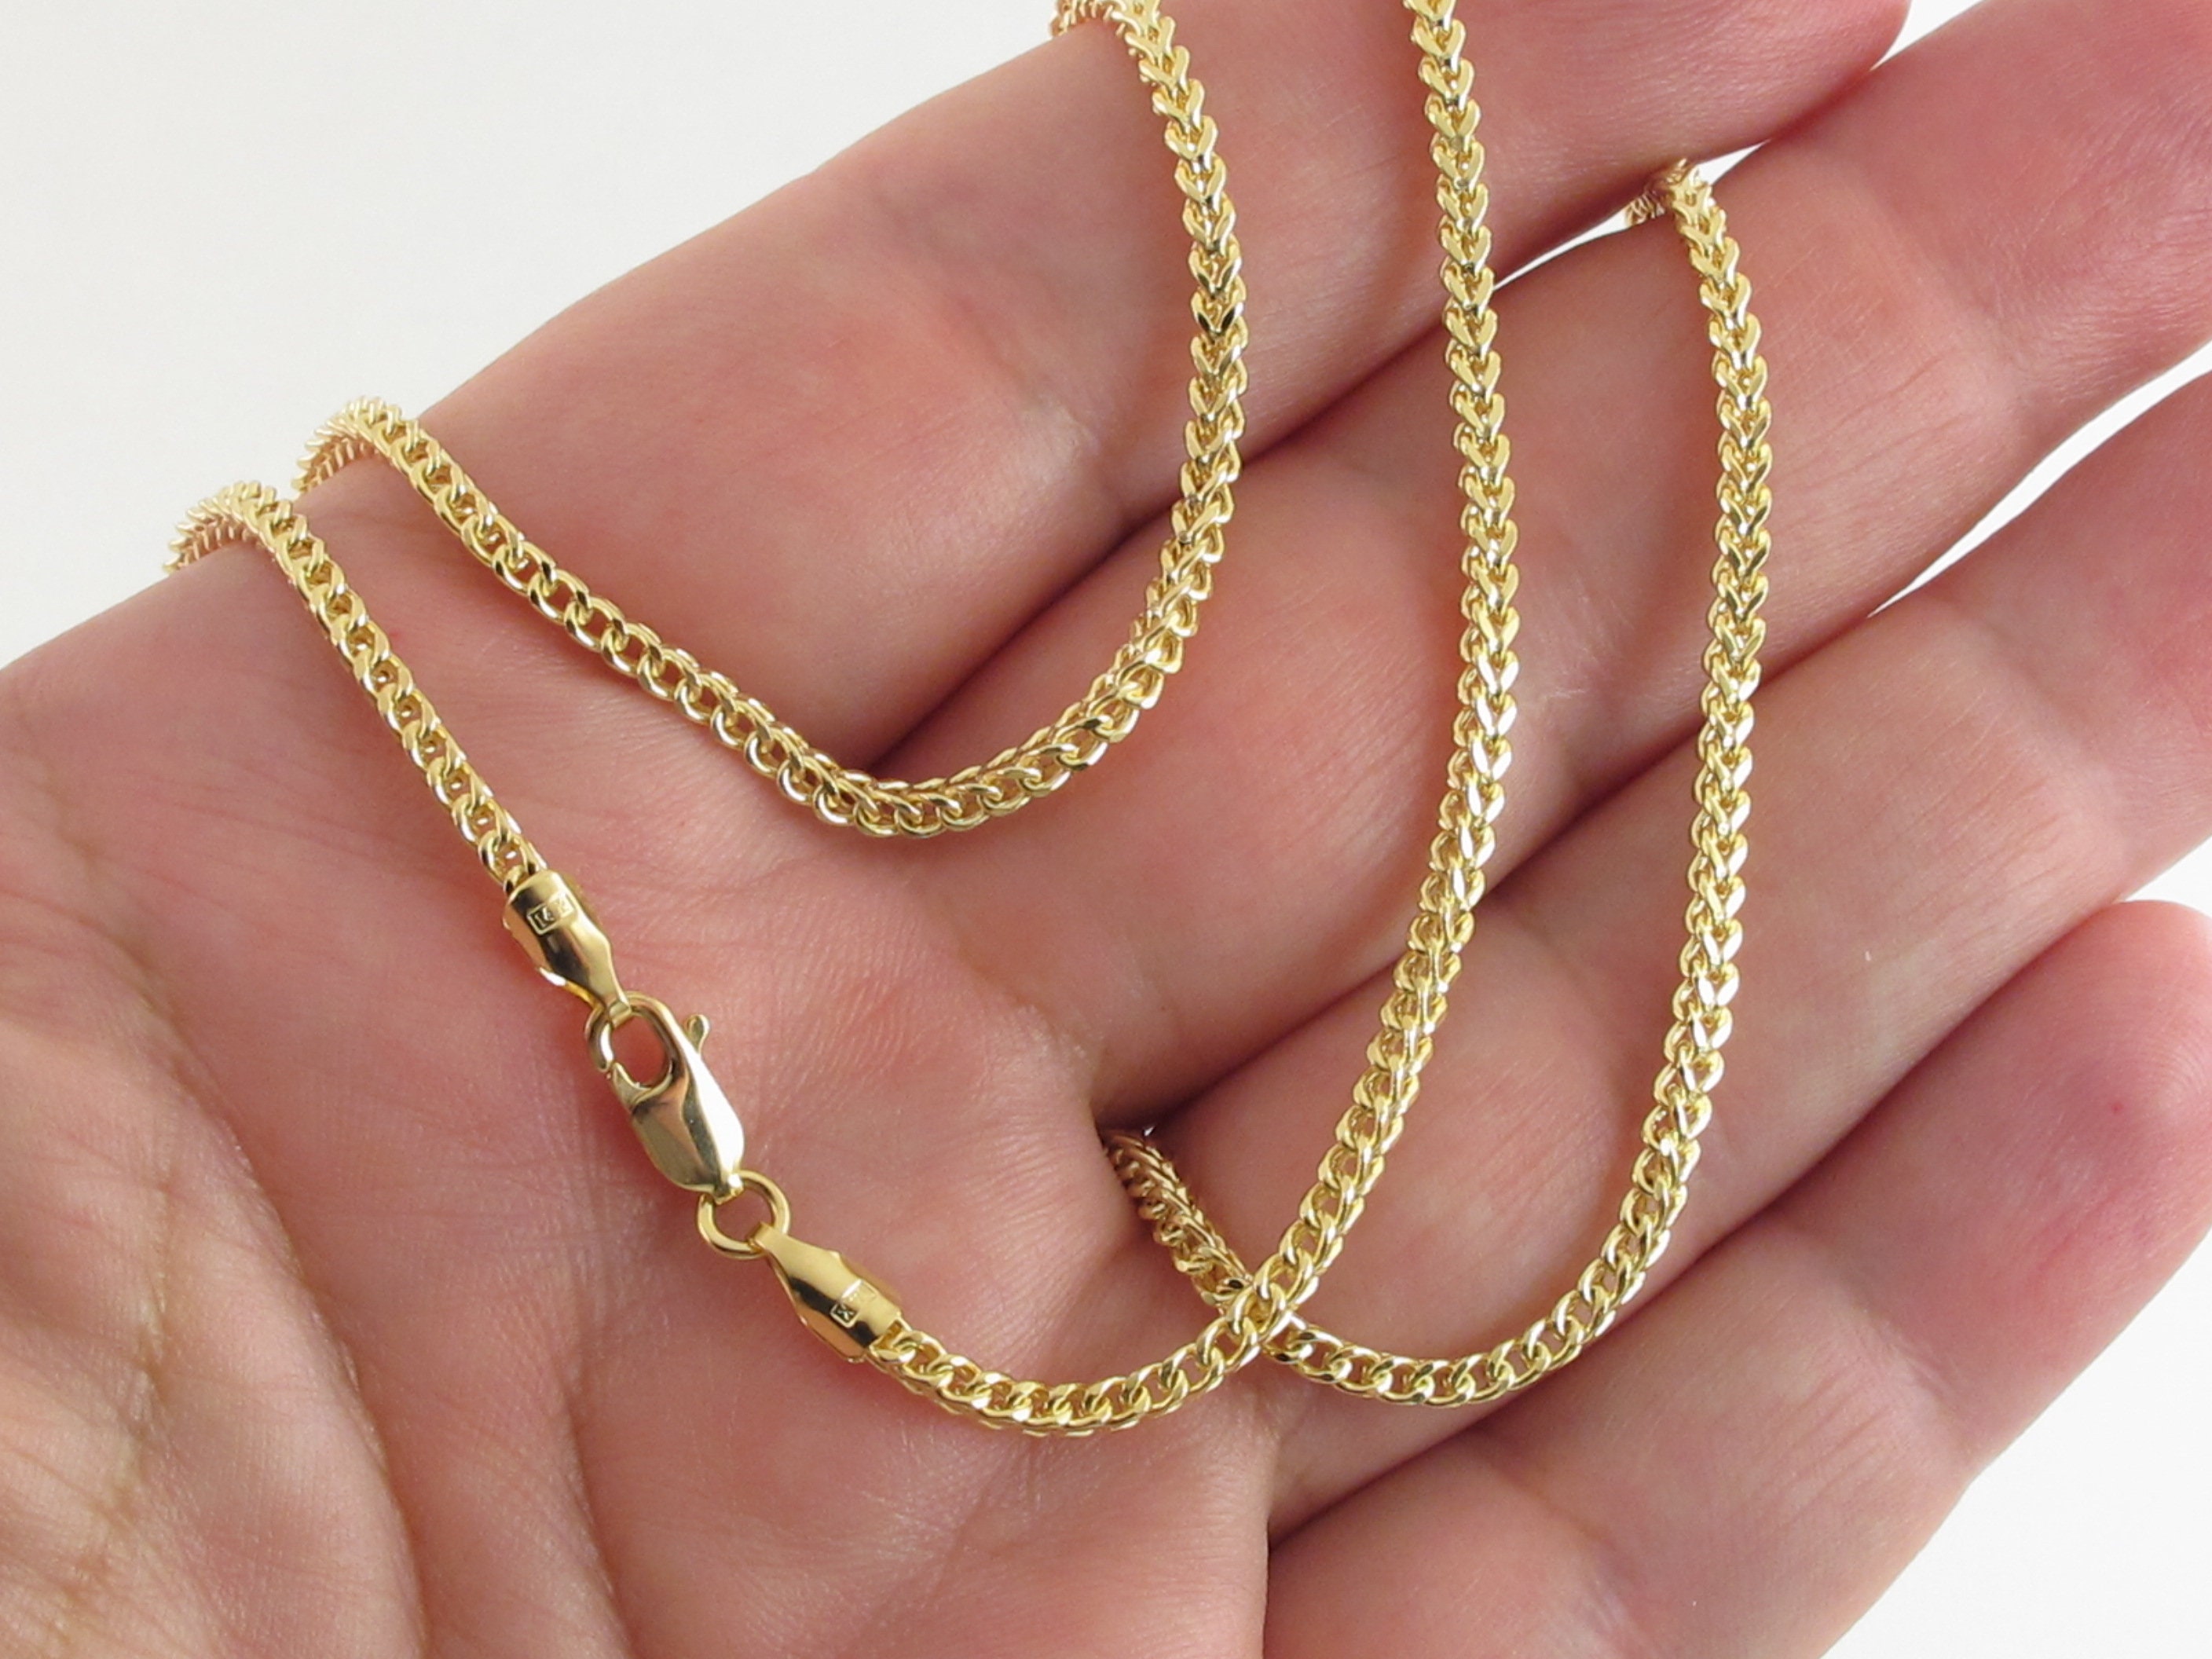 0.7mm Solid 14k Yellow Gold Polished Twisted Sideways Cross 17 inch Necklace Chain